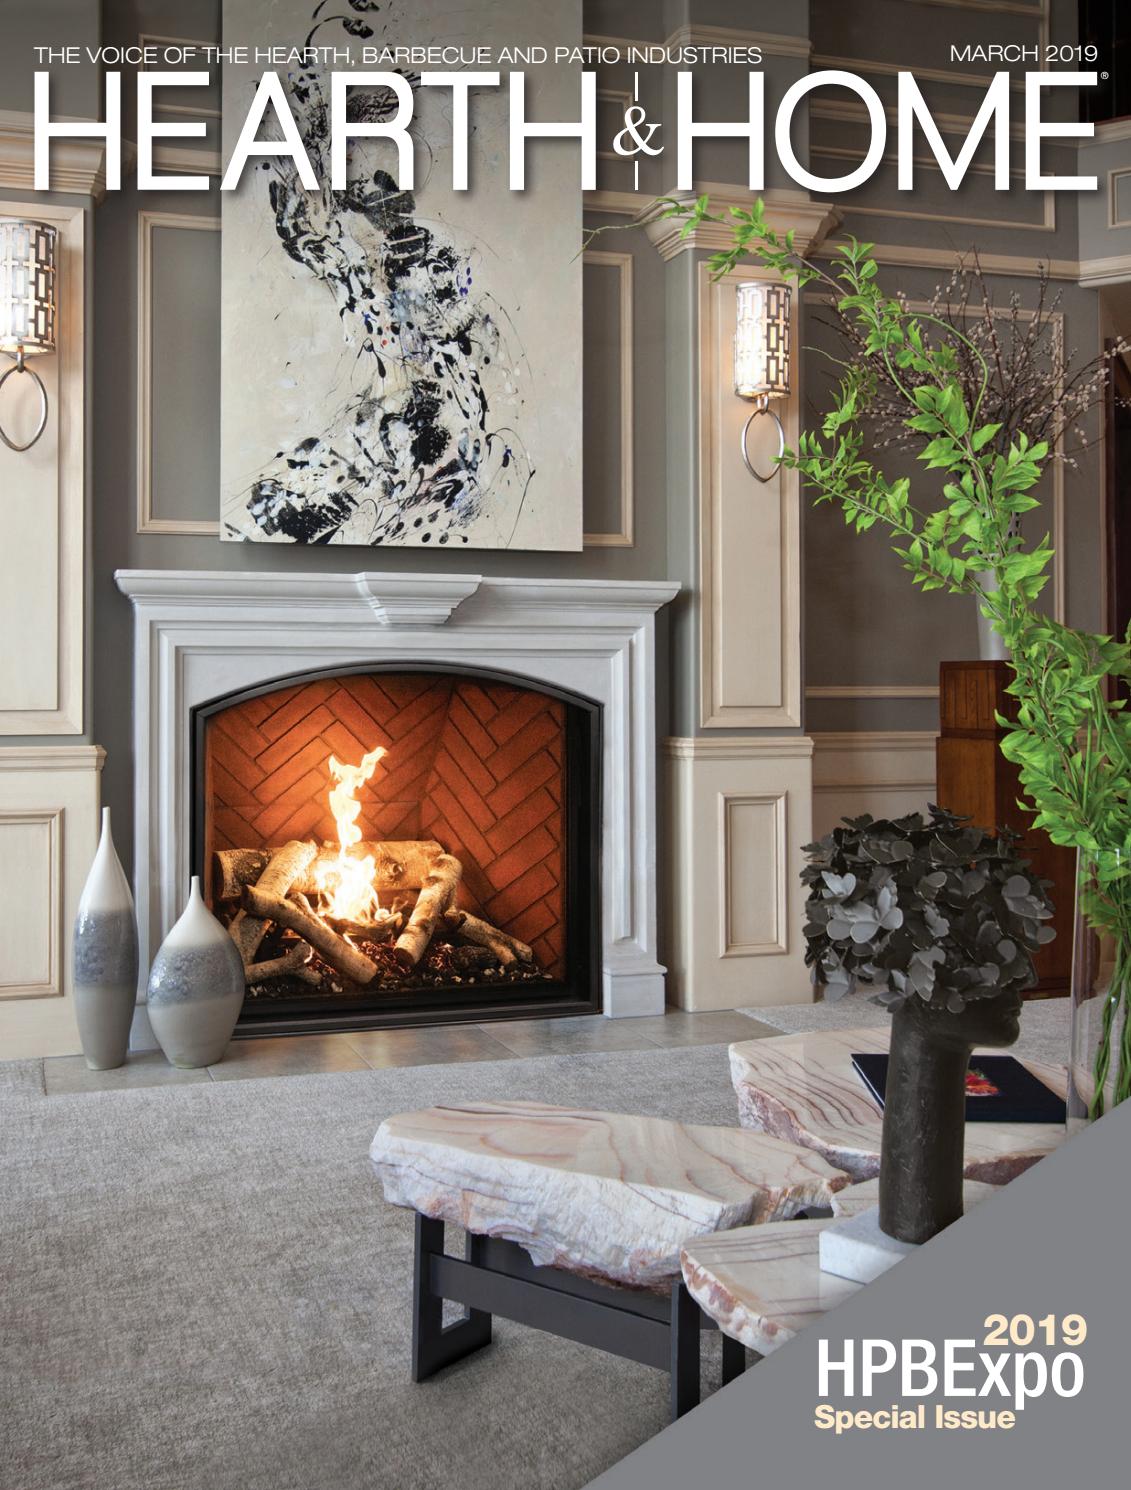 Stainless Steel Fireplace Insert Luxury Hearth & Home Magazine – 2019 March issue by Hearth & Home